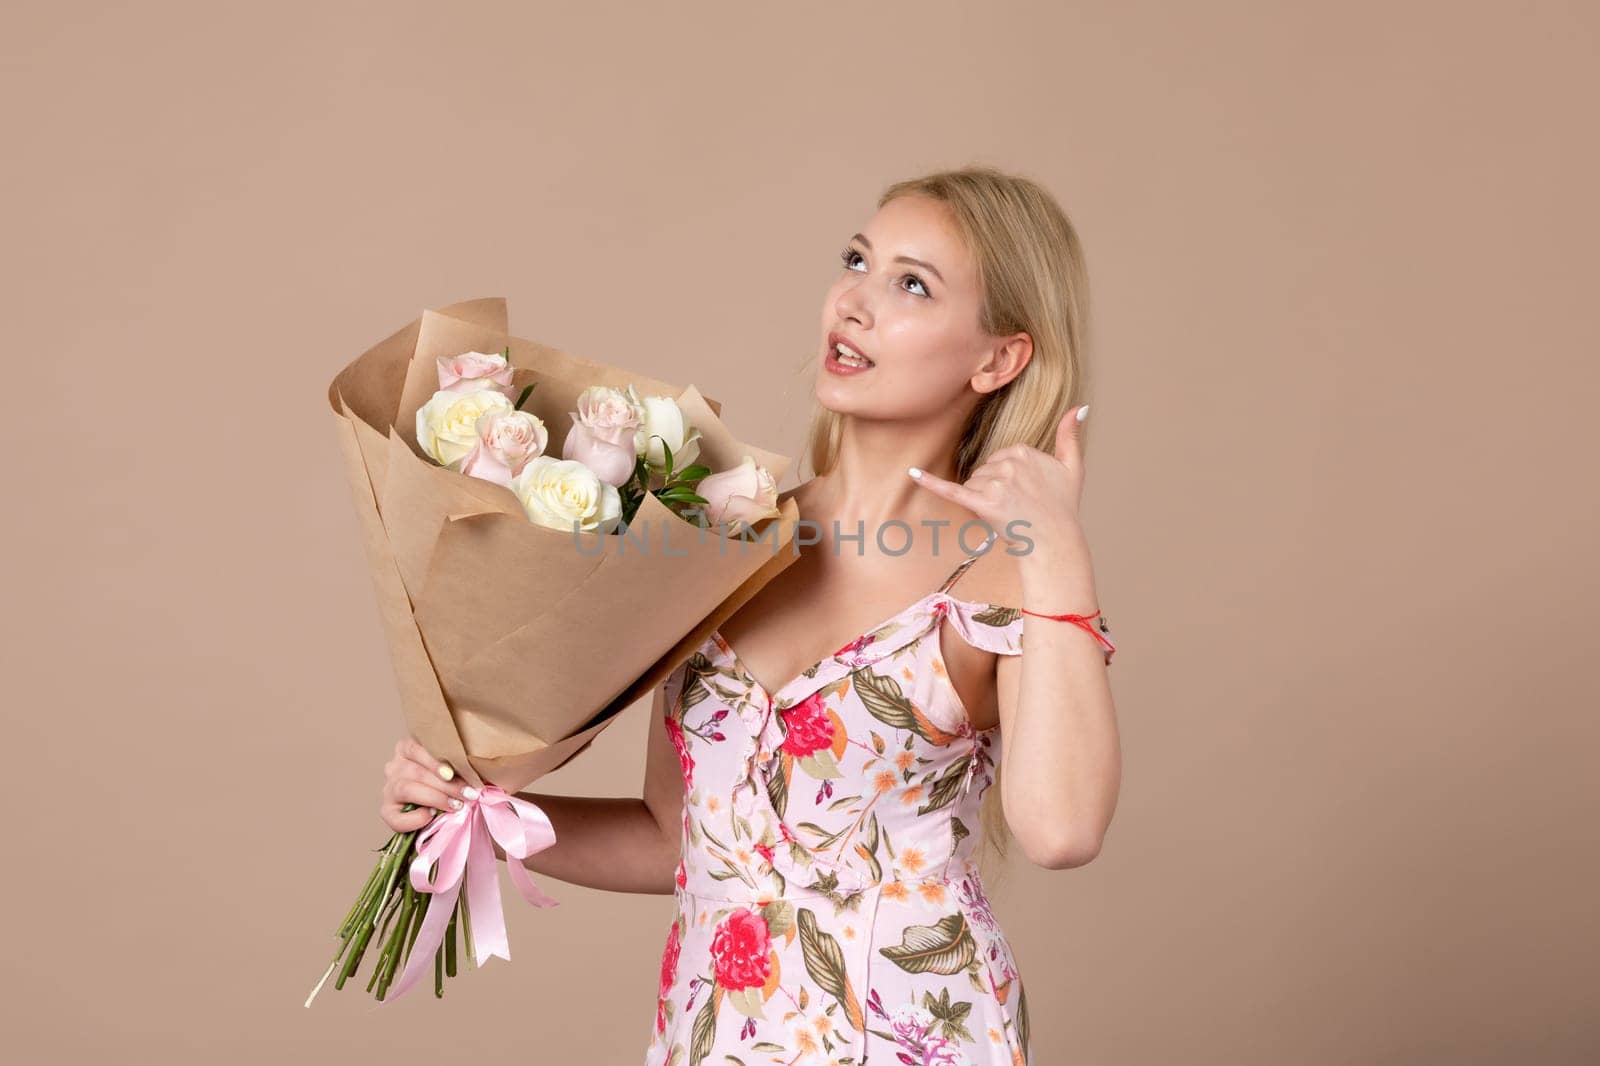 front view young female posing with bouquet of beautiful roses on brown background feminine sensual woman horizontal march gift marriage